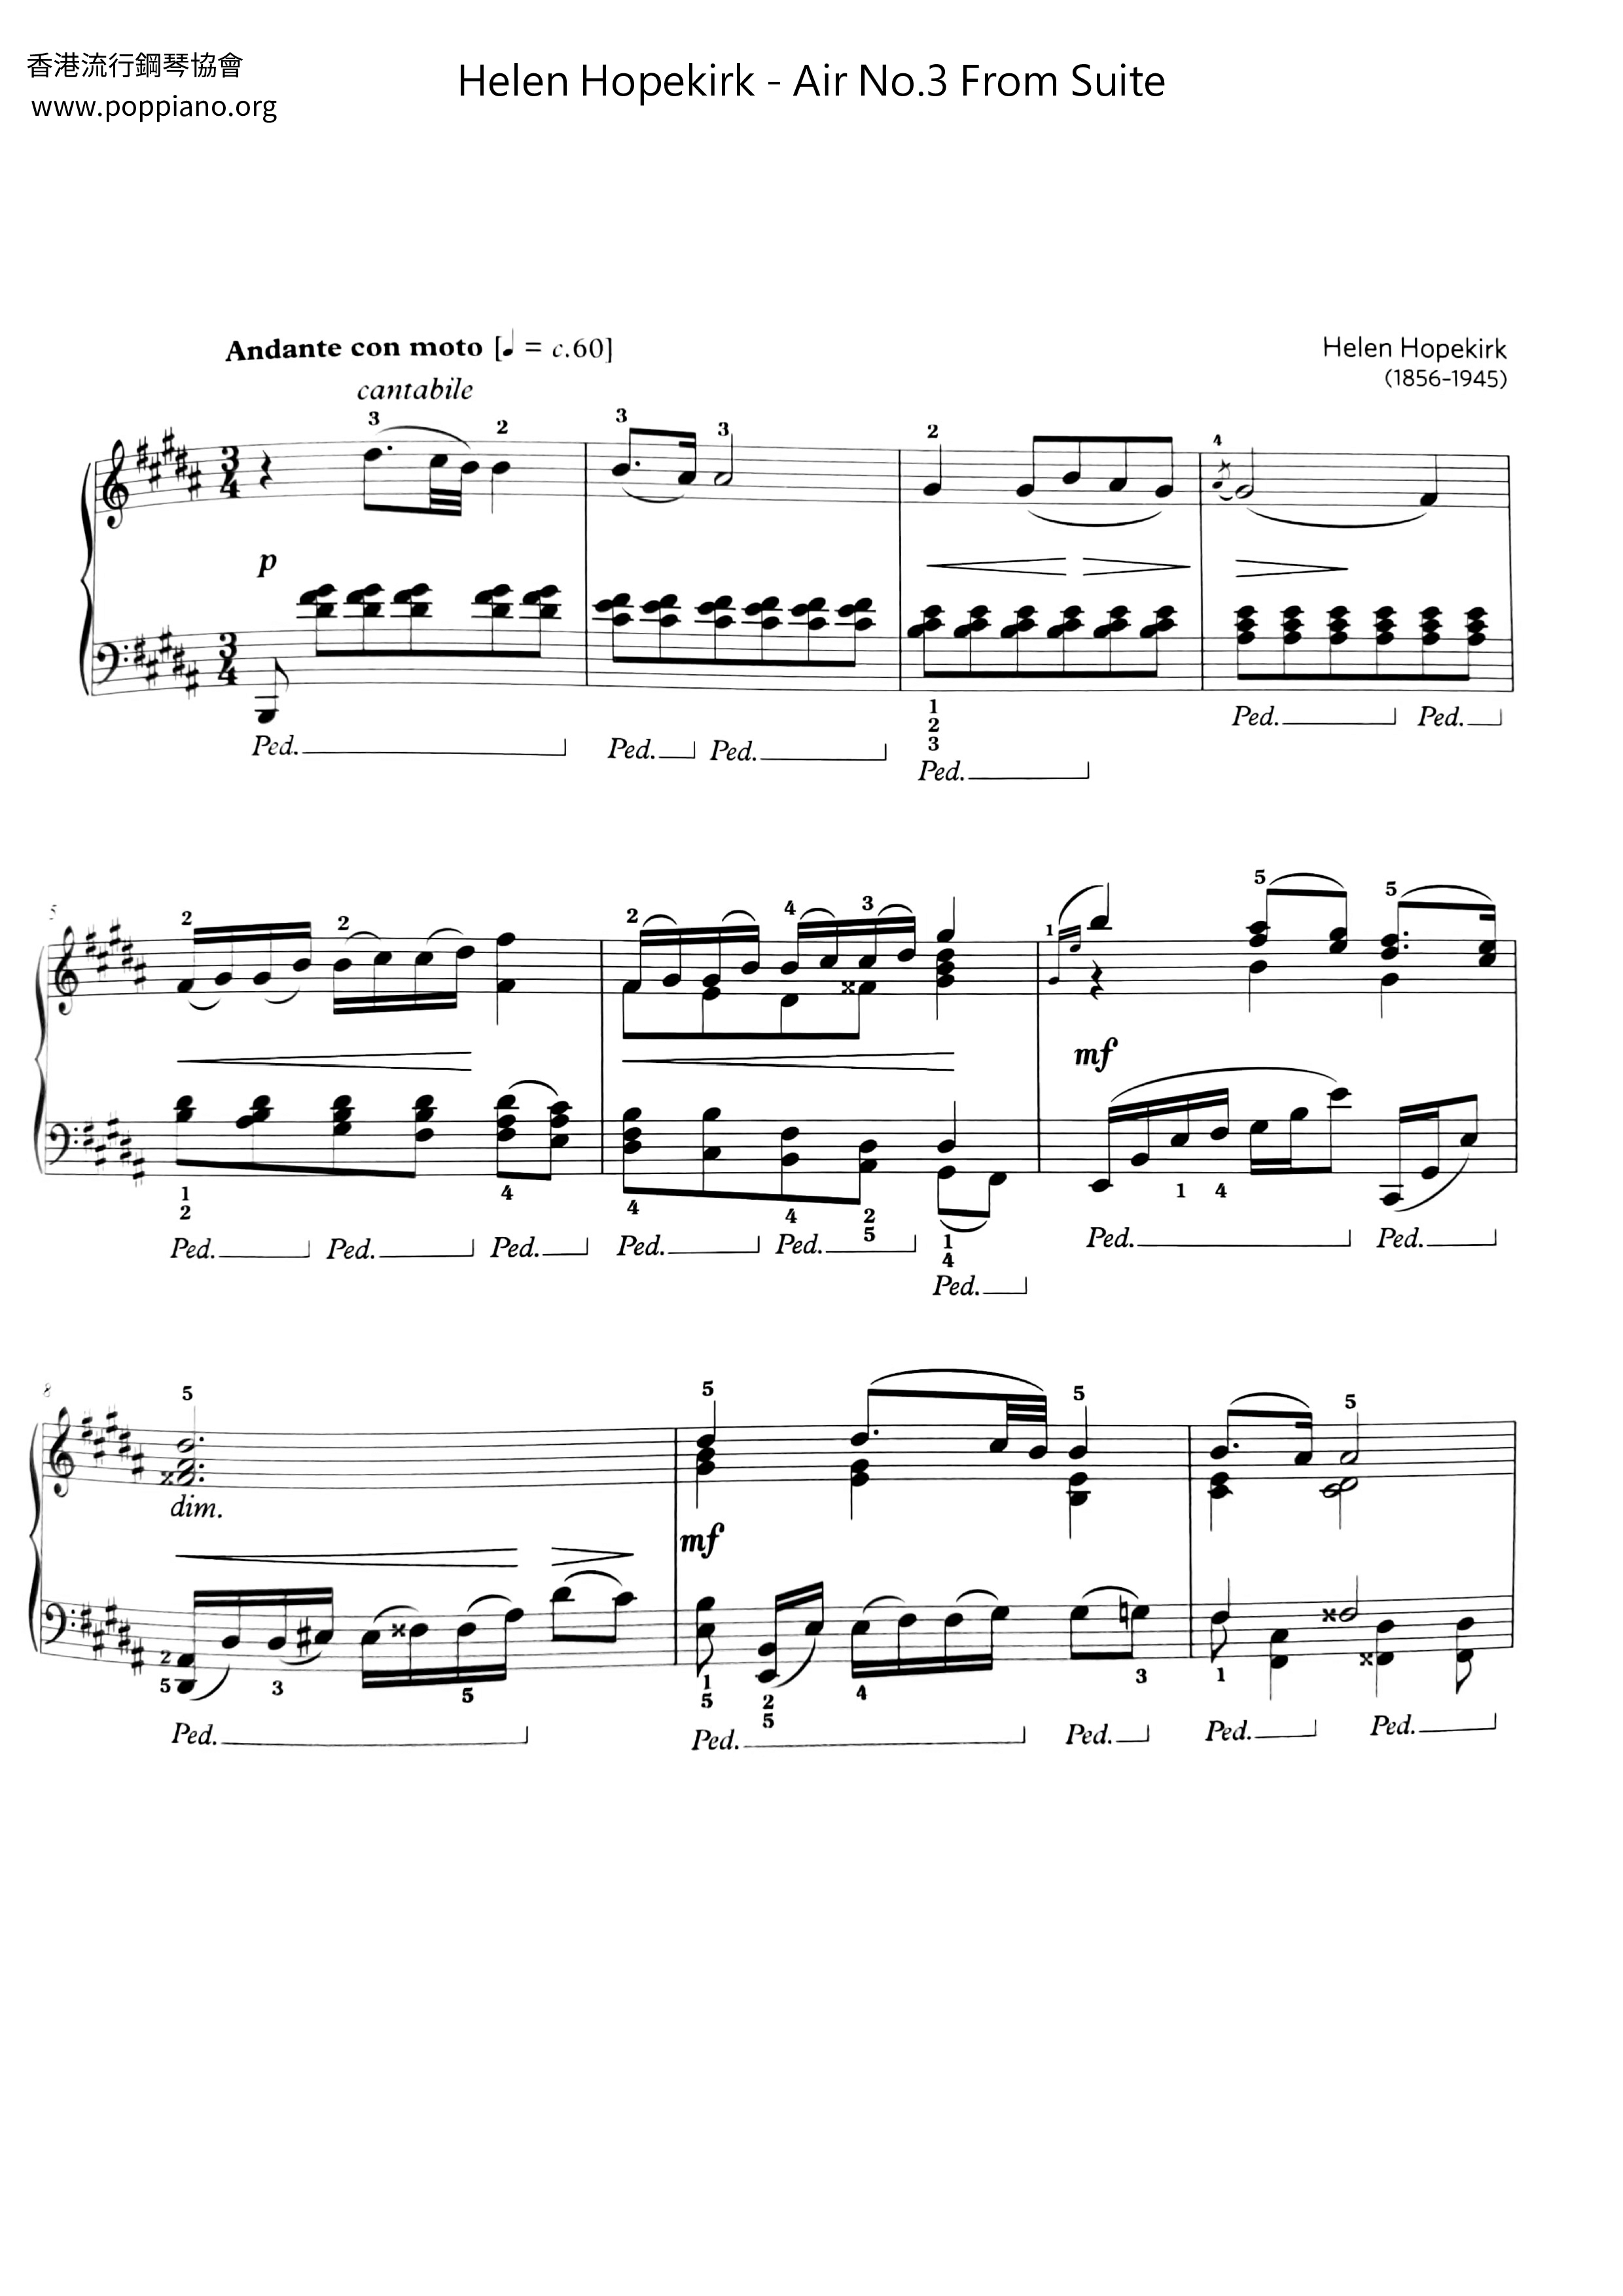 Air No.3 From Suite Score